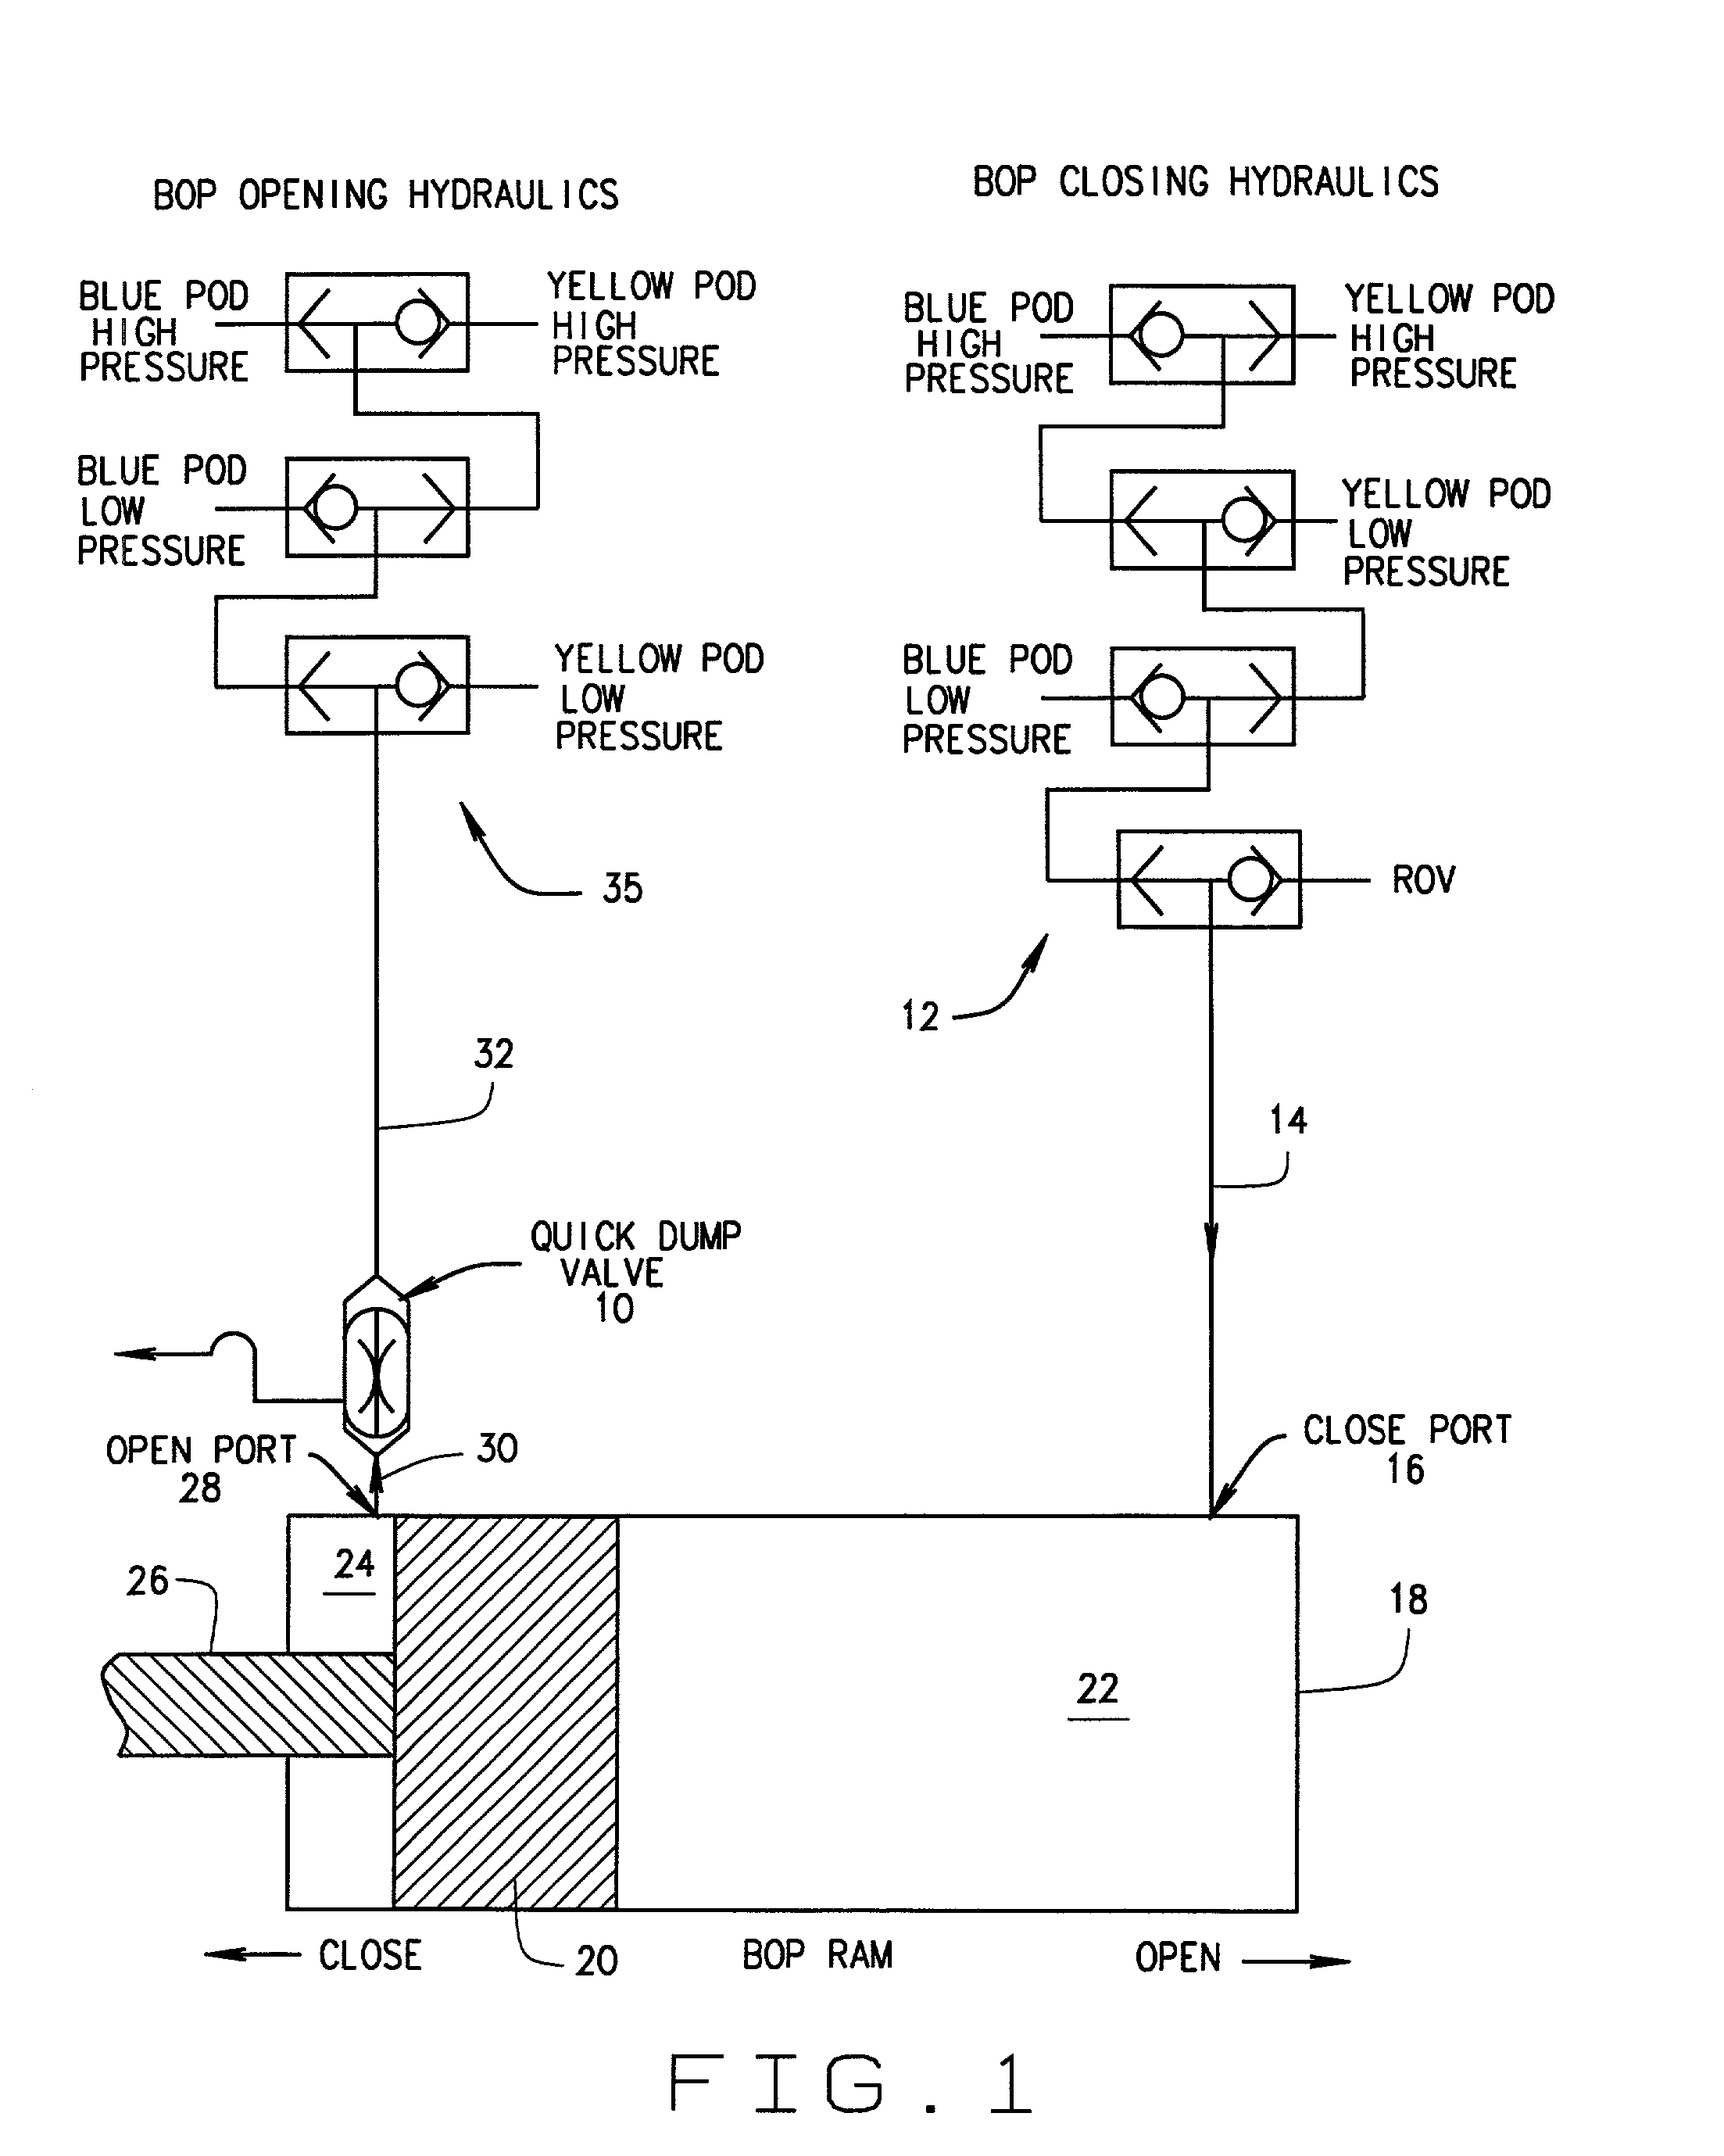 BOP operating system with quick dump valve